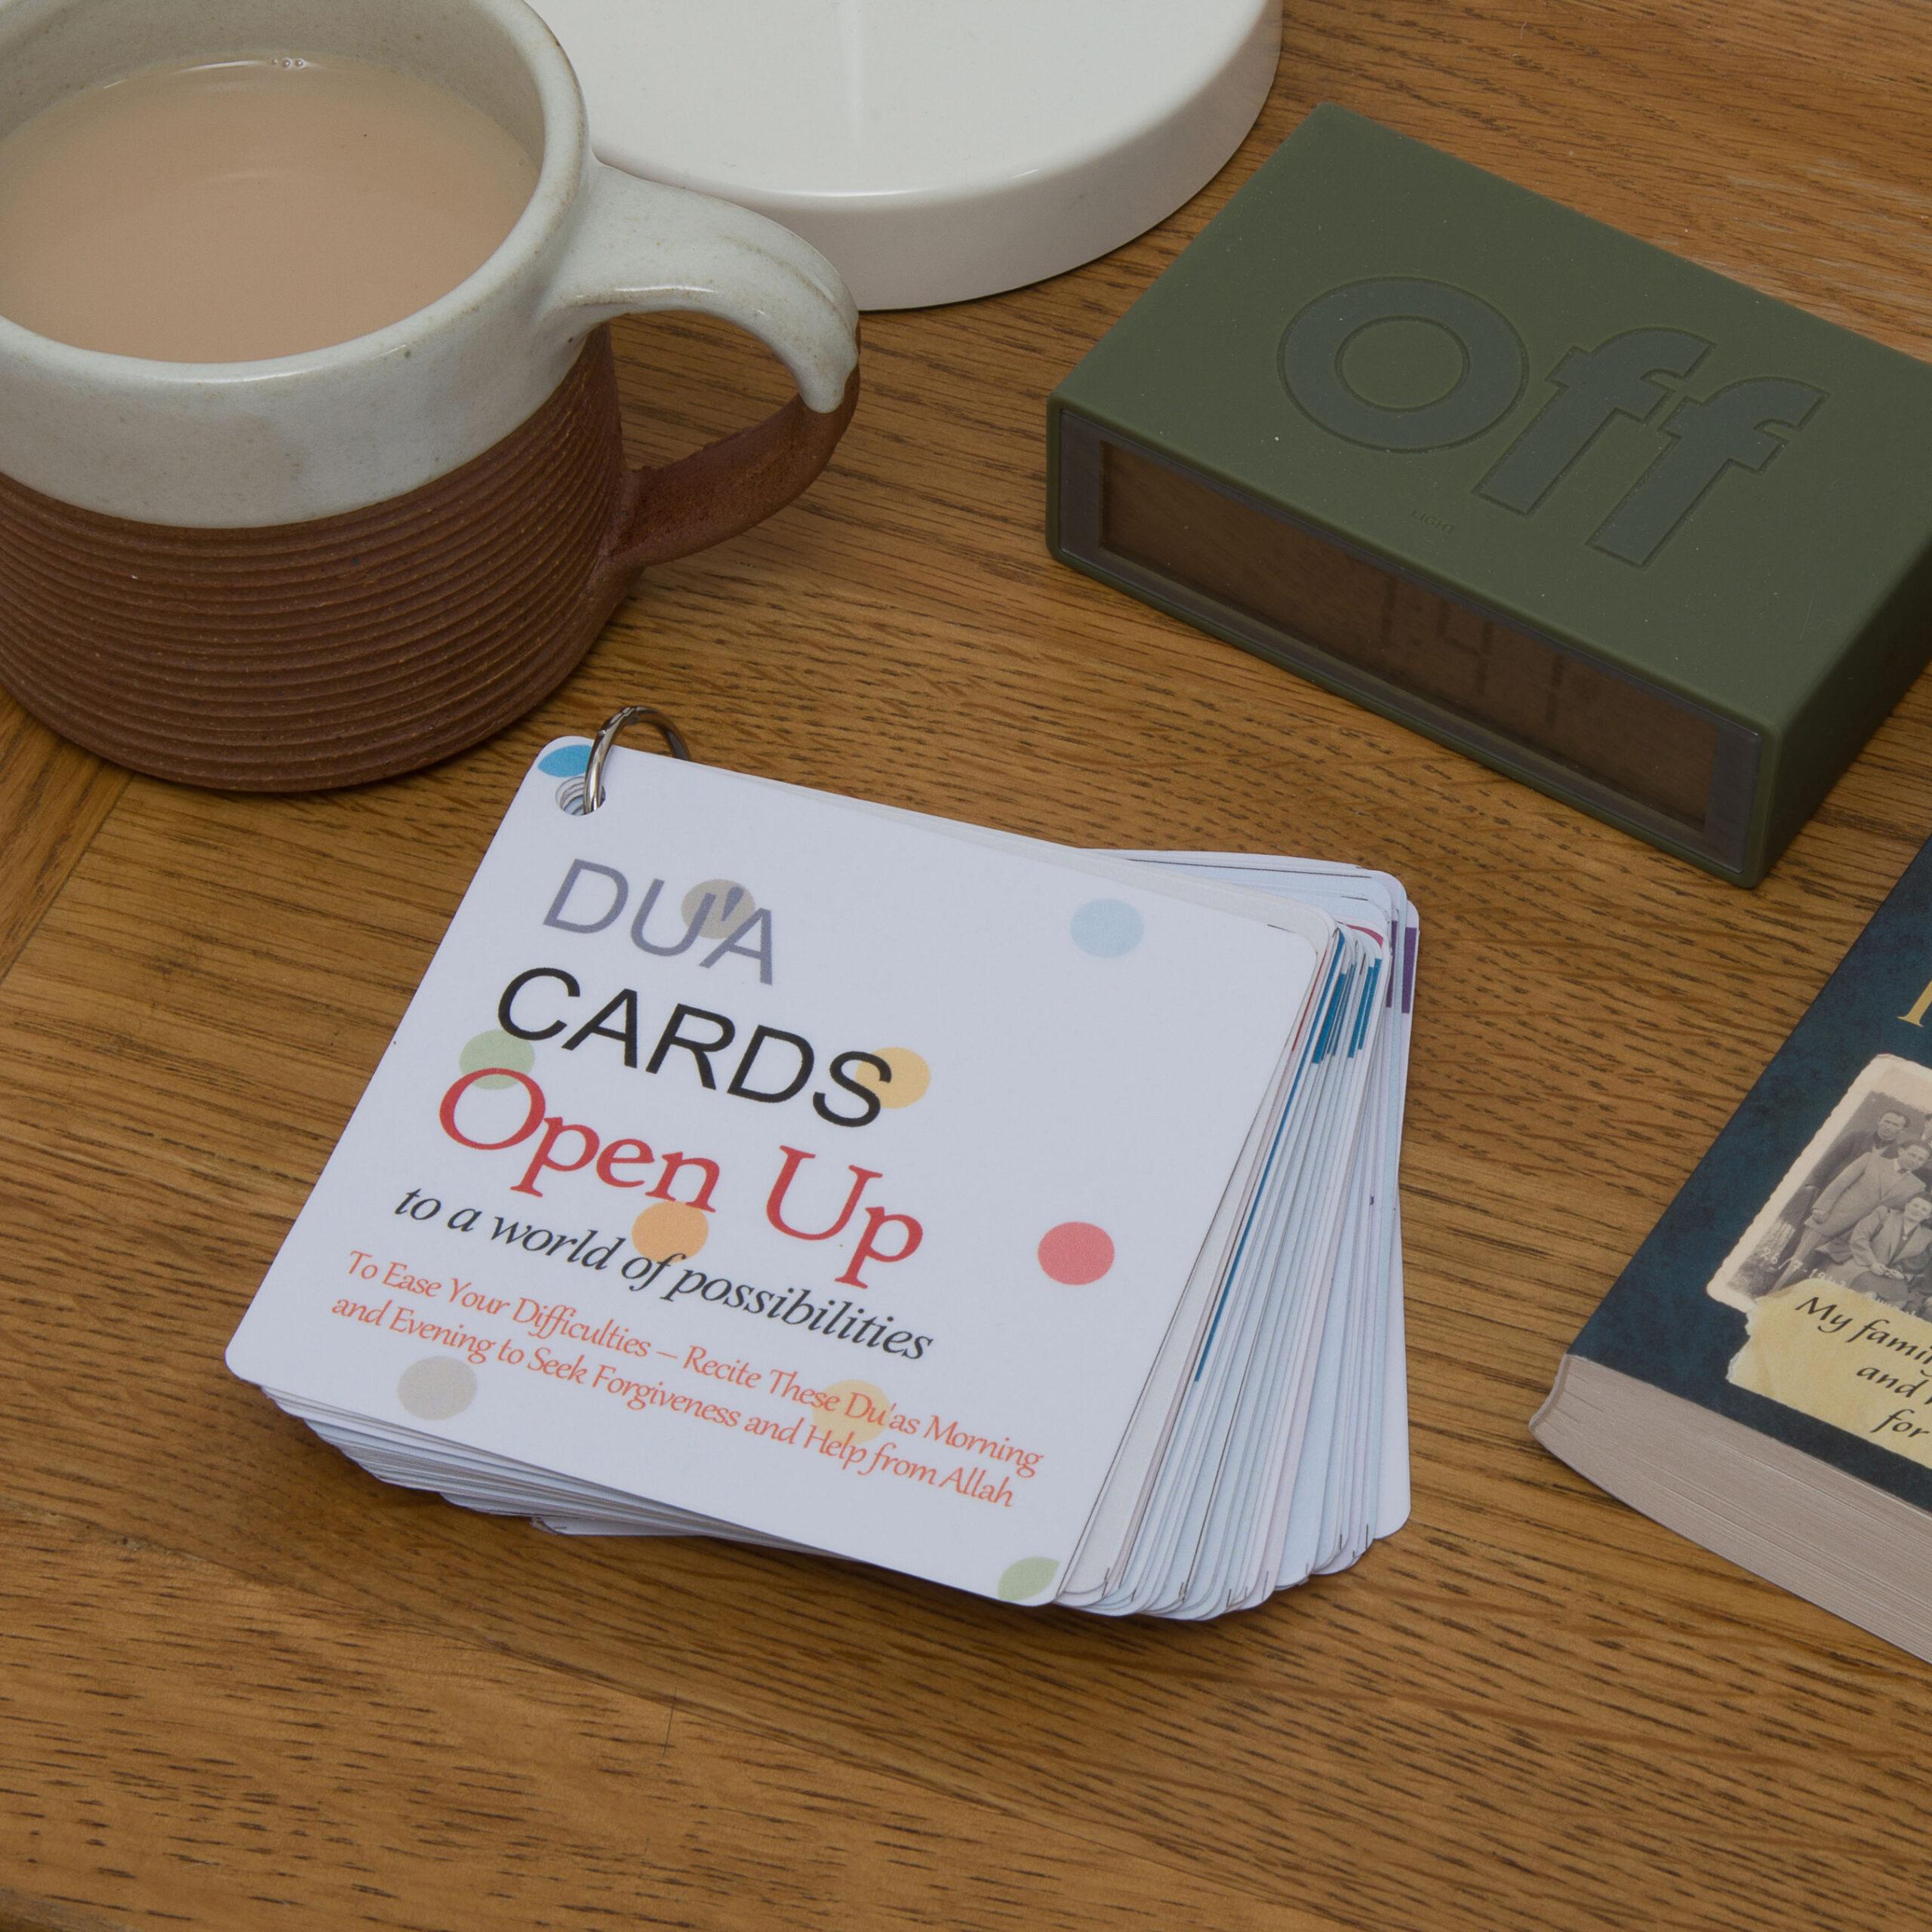 Stack of Dua Cards with text 'Open Up to a world of possibilities' on a table with a cup of tea, a green 'off' timer, and a vintage book in the background, suggesting a peaceful reading or meditation space.